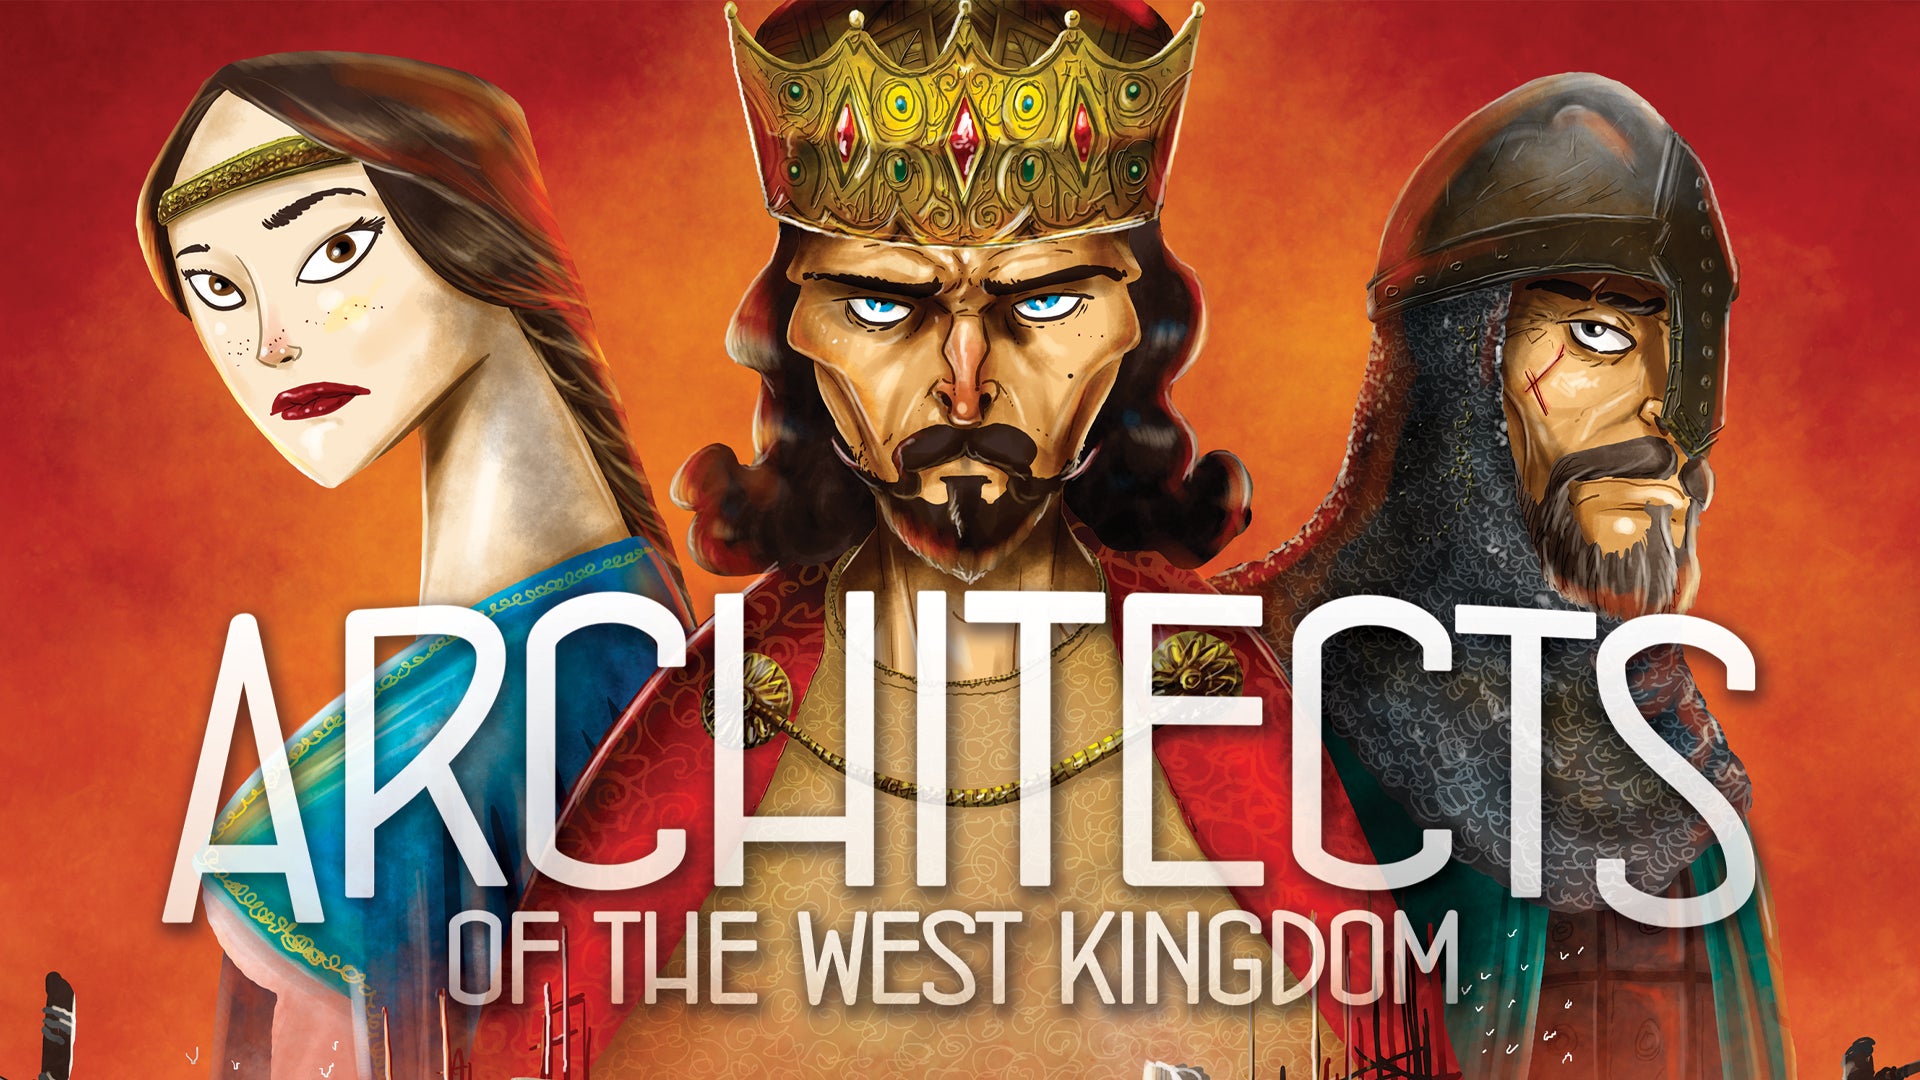 Image for Architects of the West Kingdom